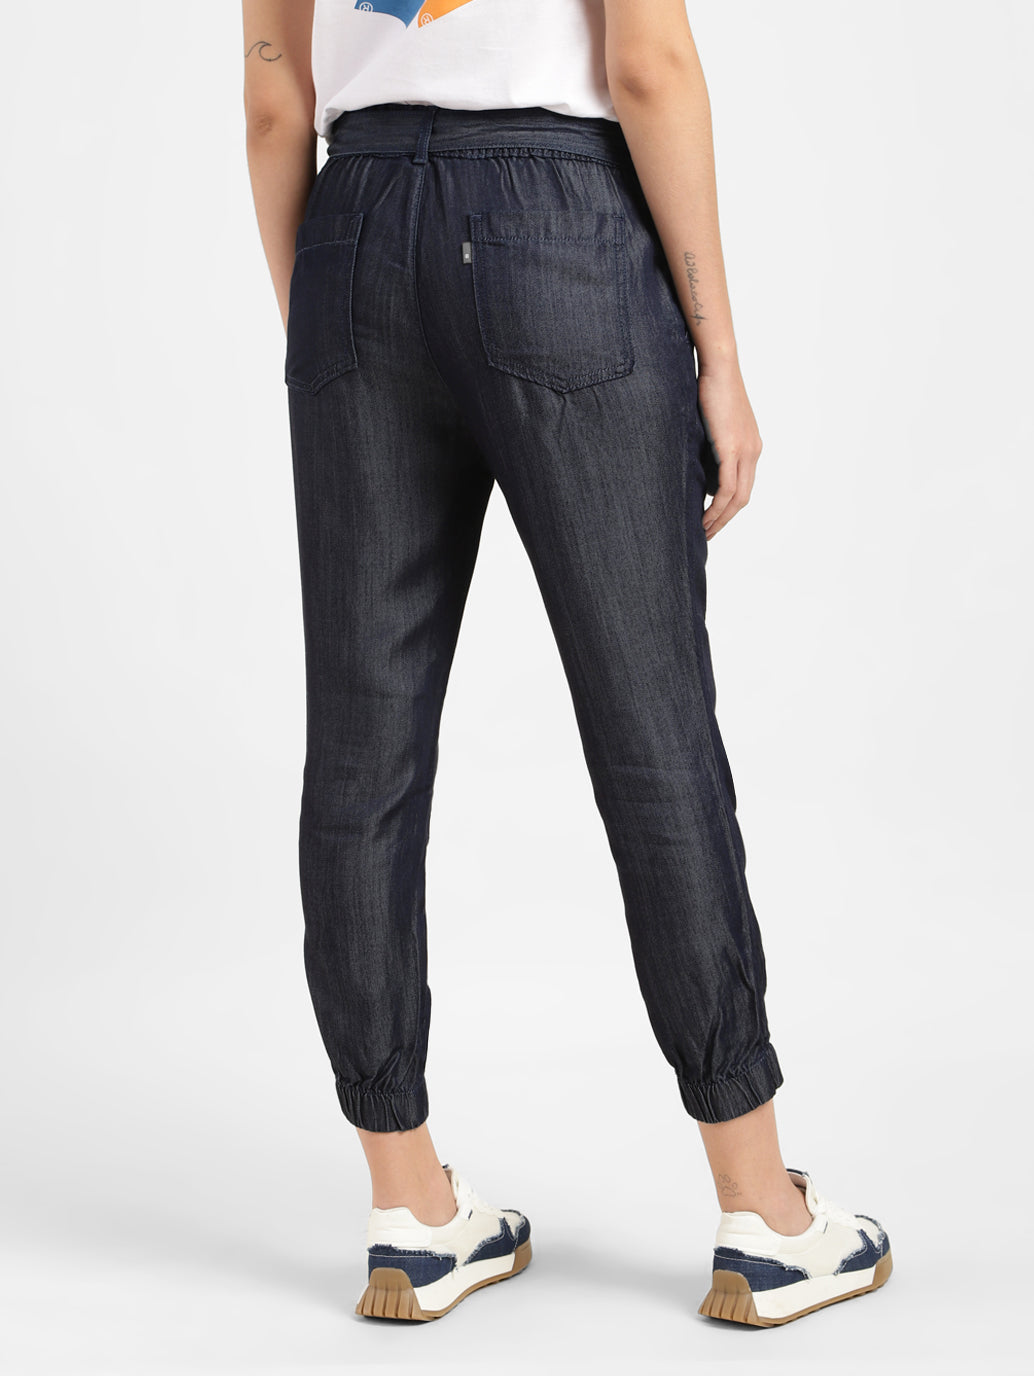 Women's High Rise Regular Fit Joggers – Levis India Store